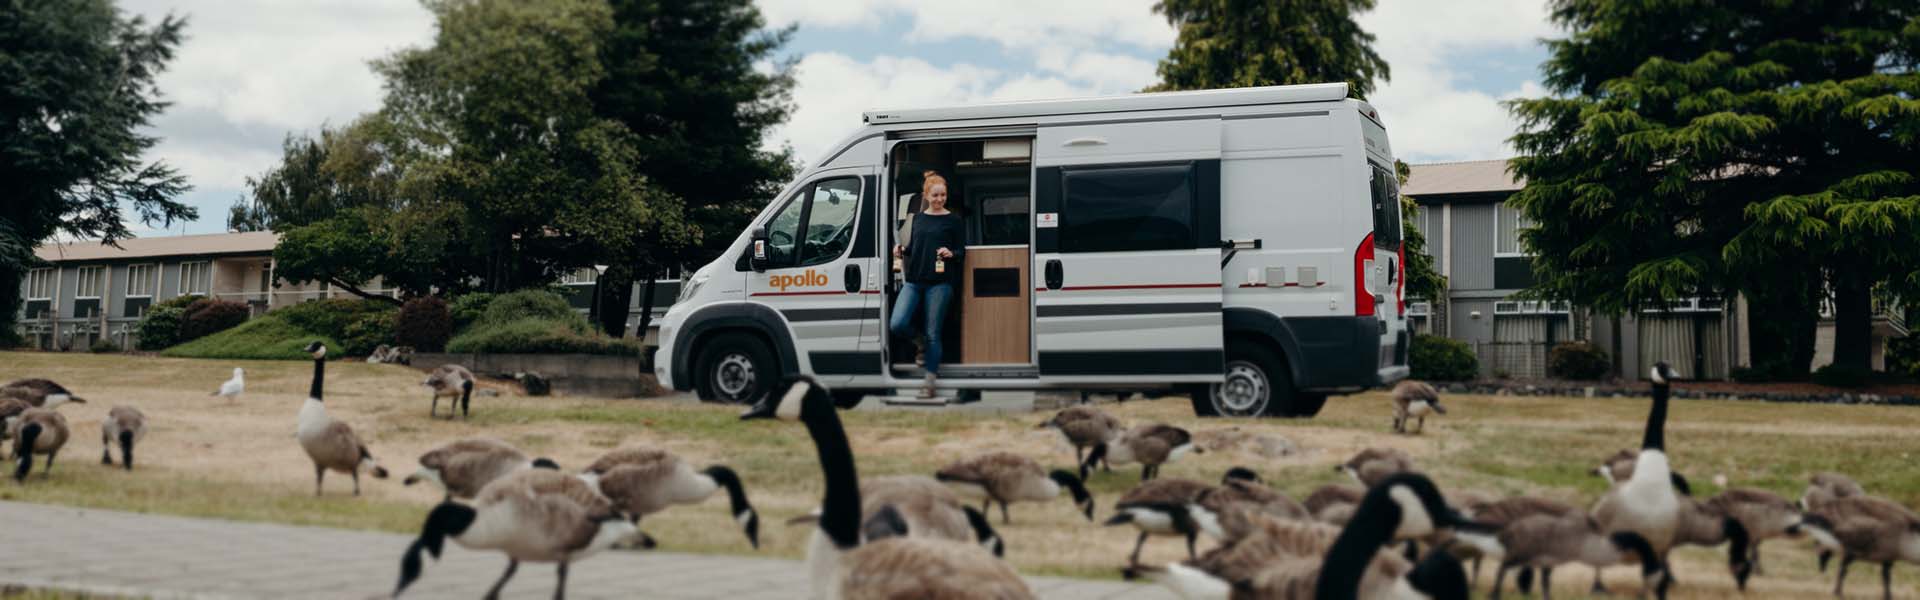 woman and birds in front of Apollo campervan in New Zealand